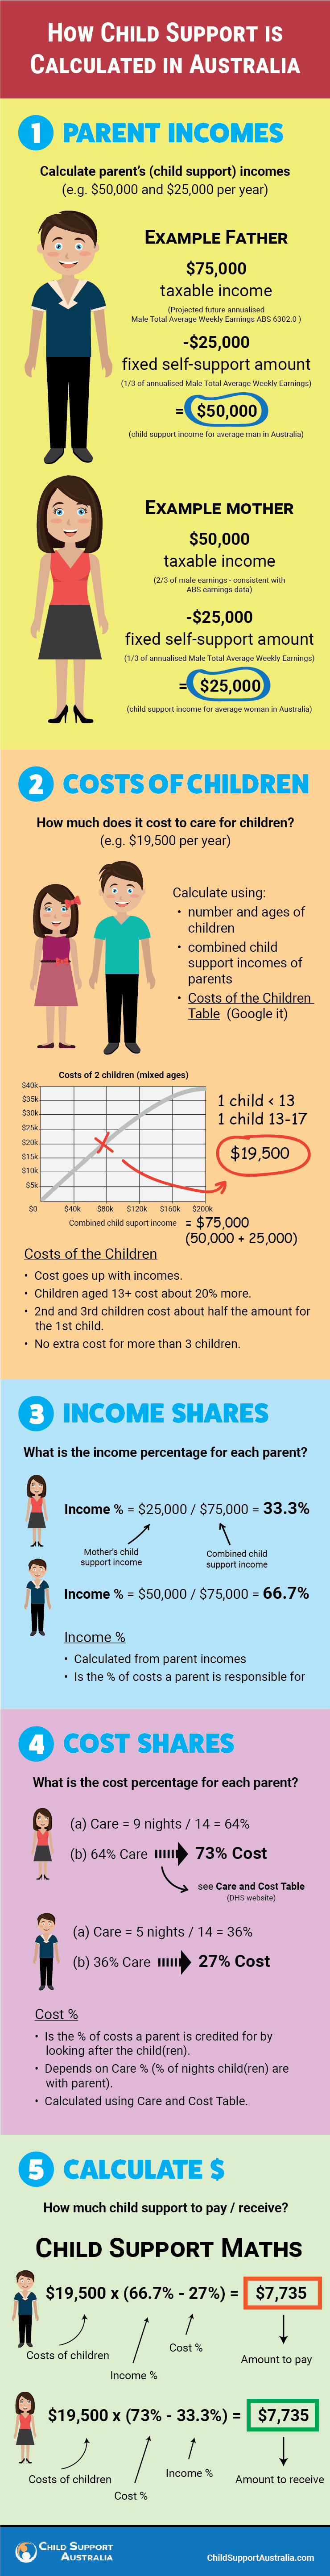 How child support is calculated in Australia.